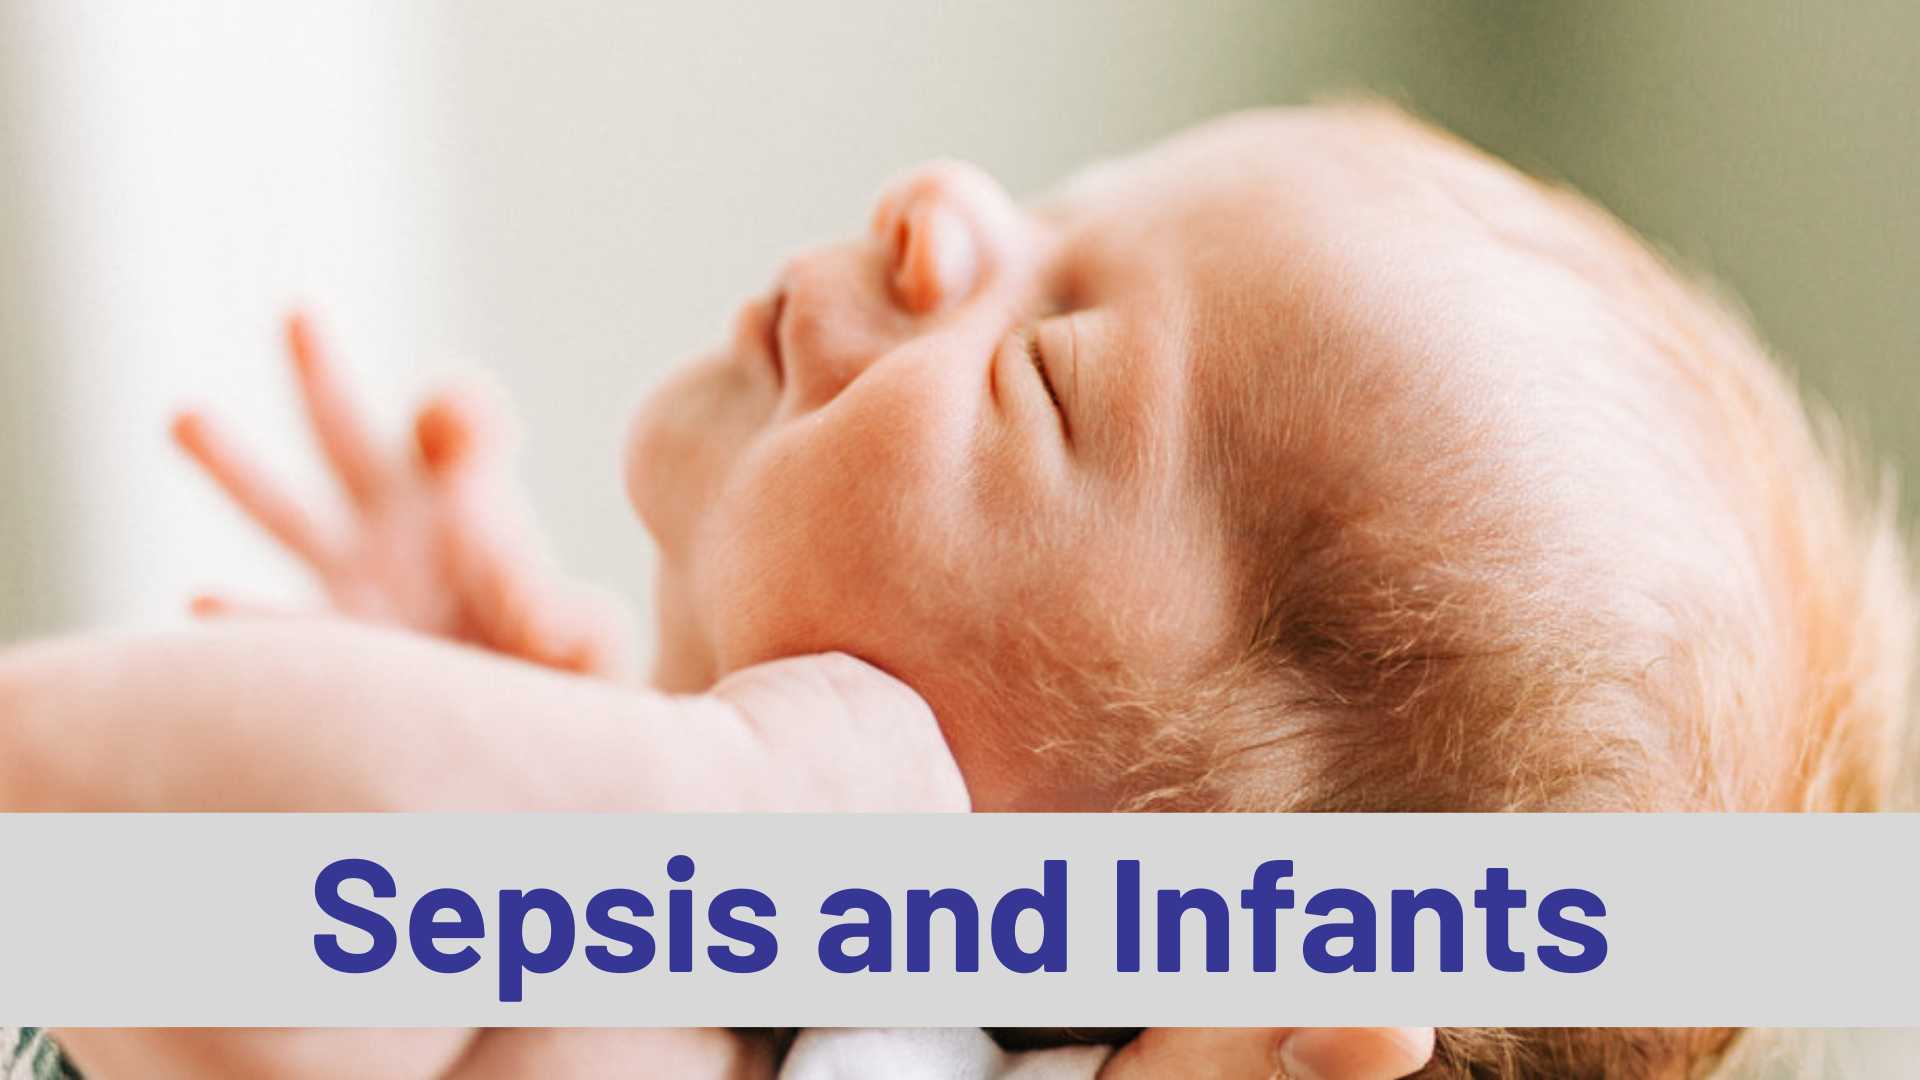 Sepsis and Infants